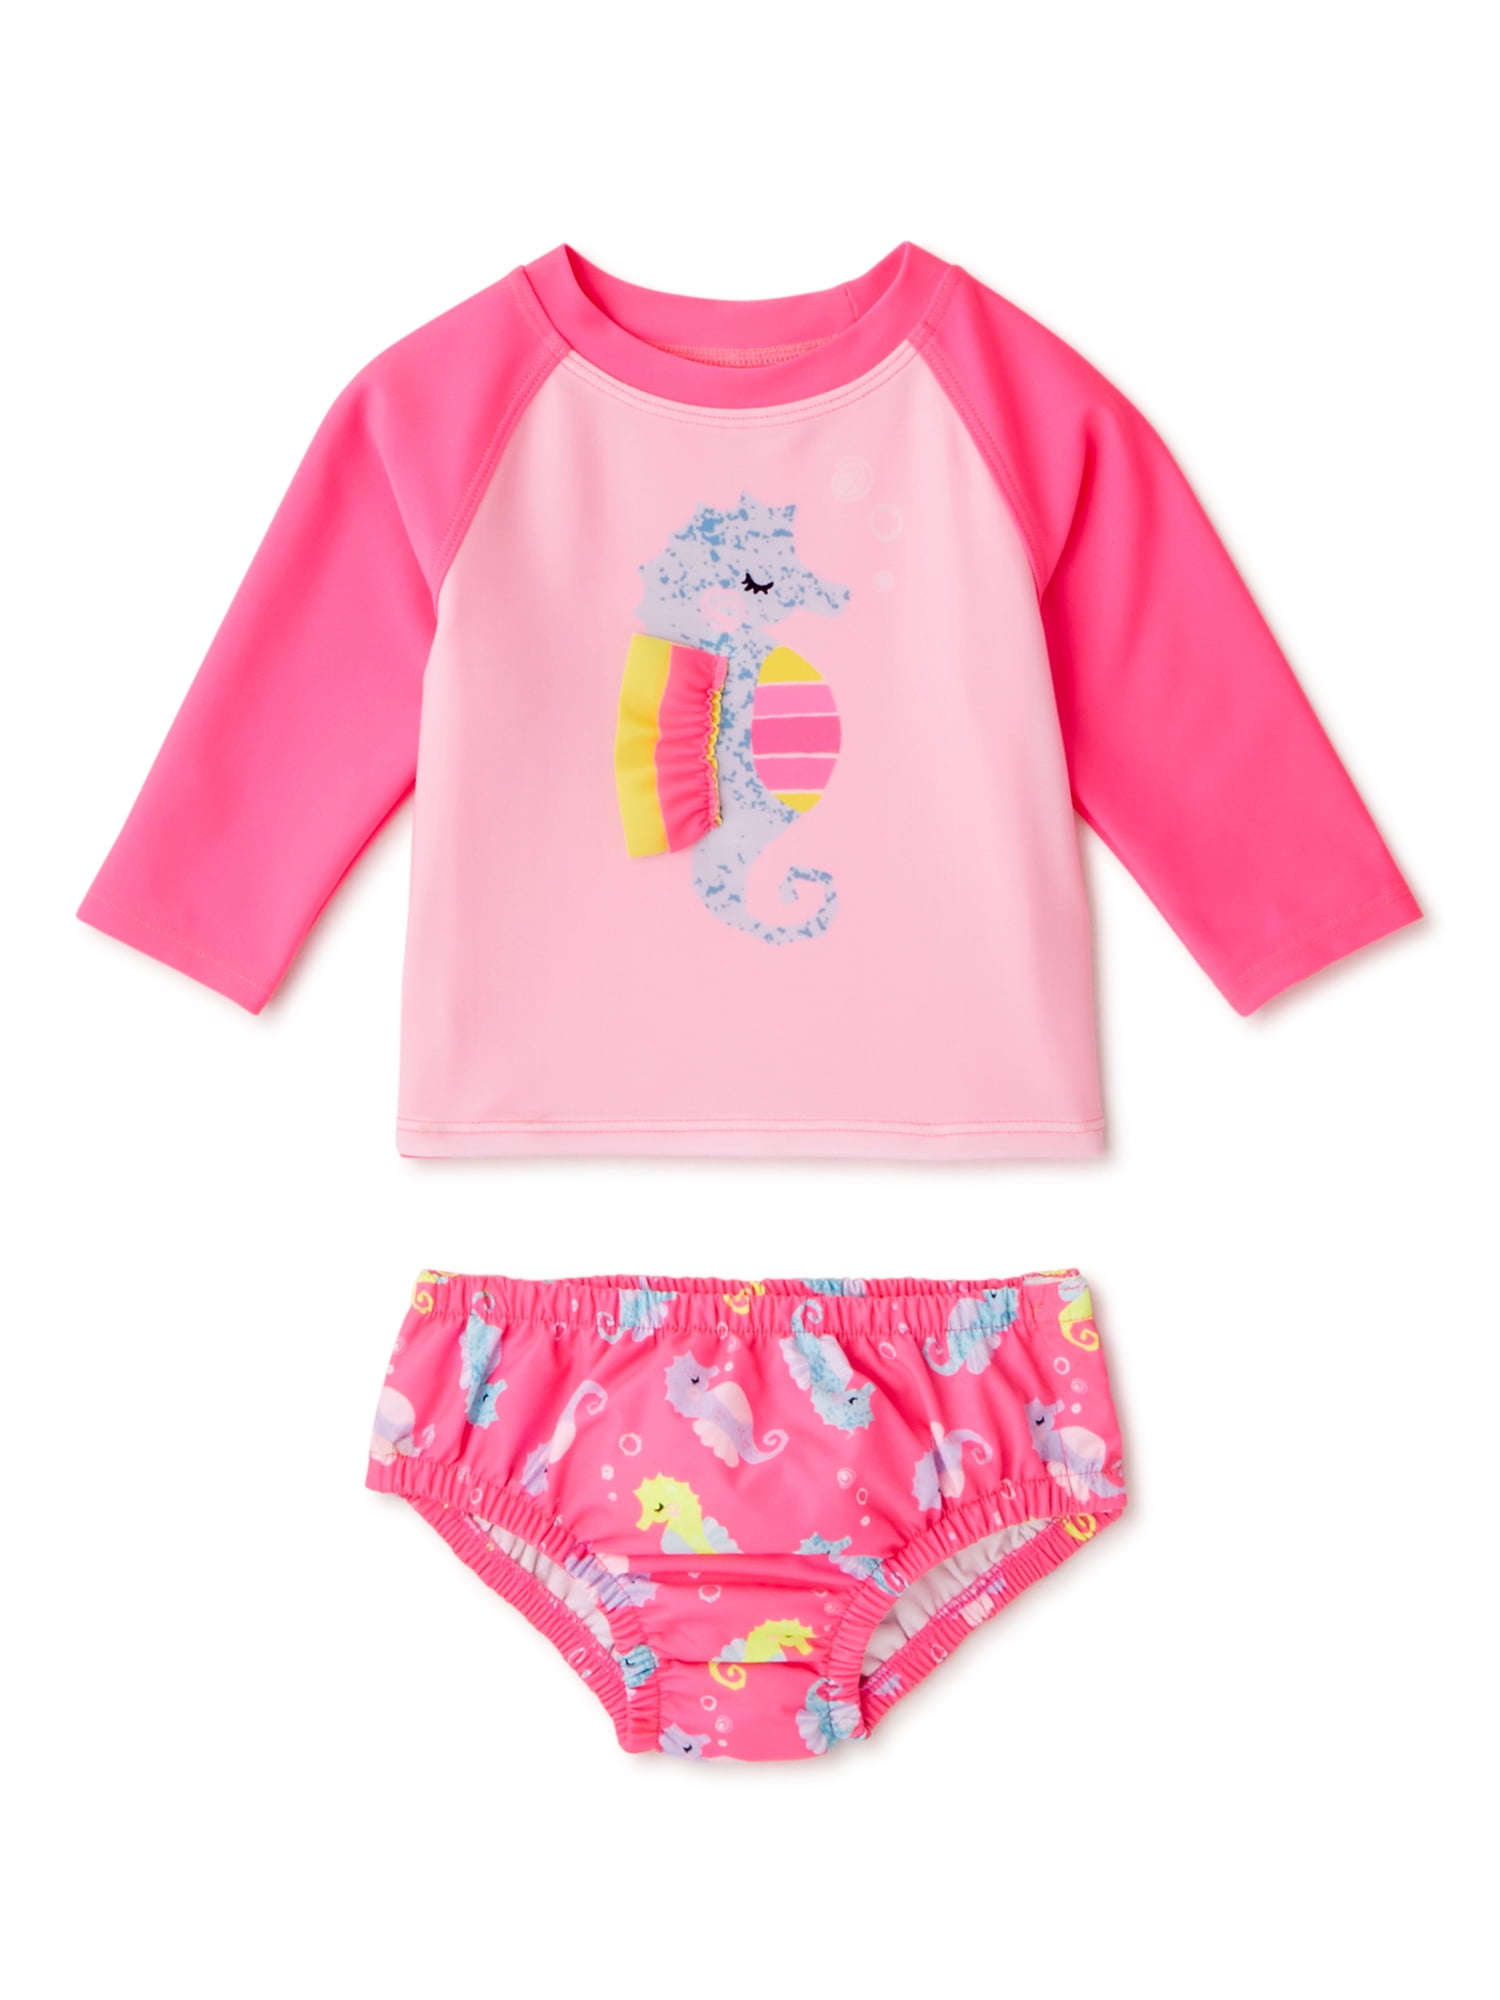 2-Piece Long-Sleeve Rash Guard Set Essentials Toddler and Baby Girls' UPF 50